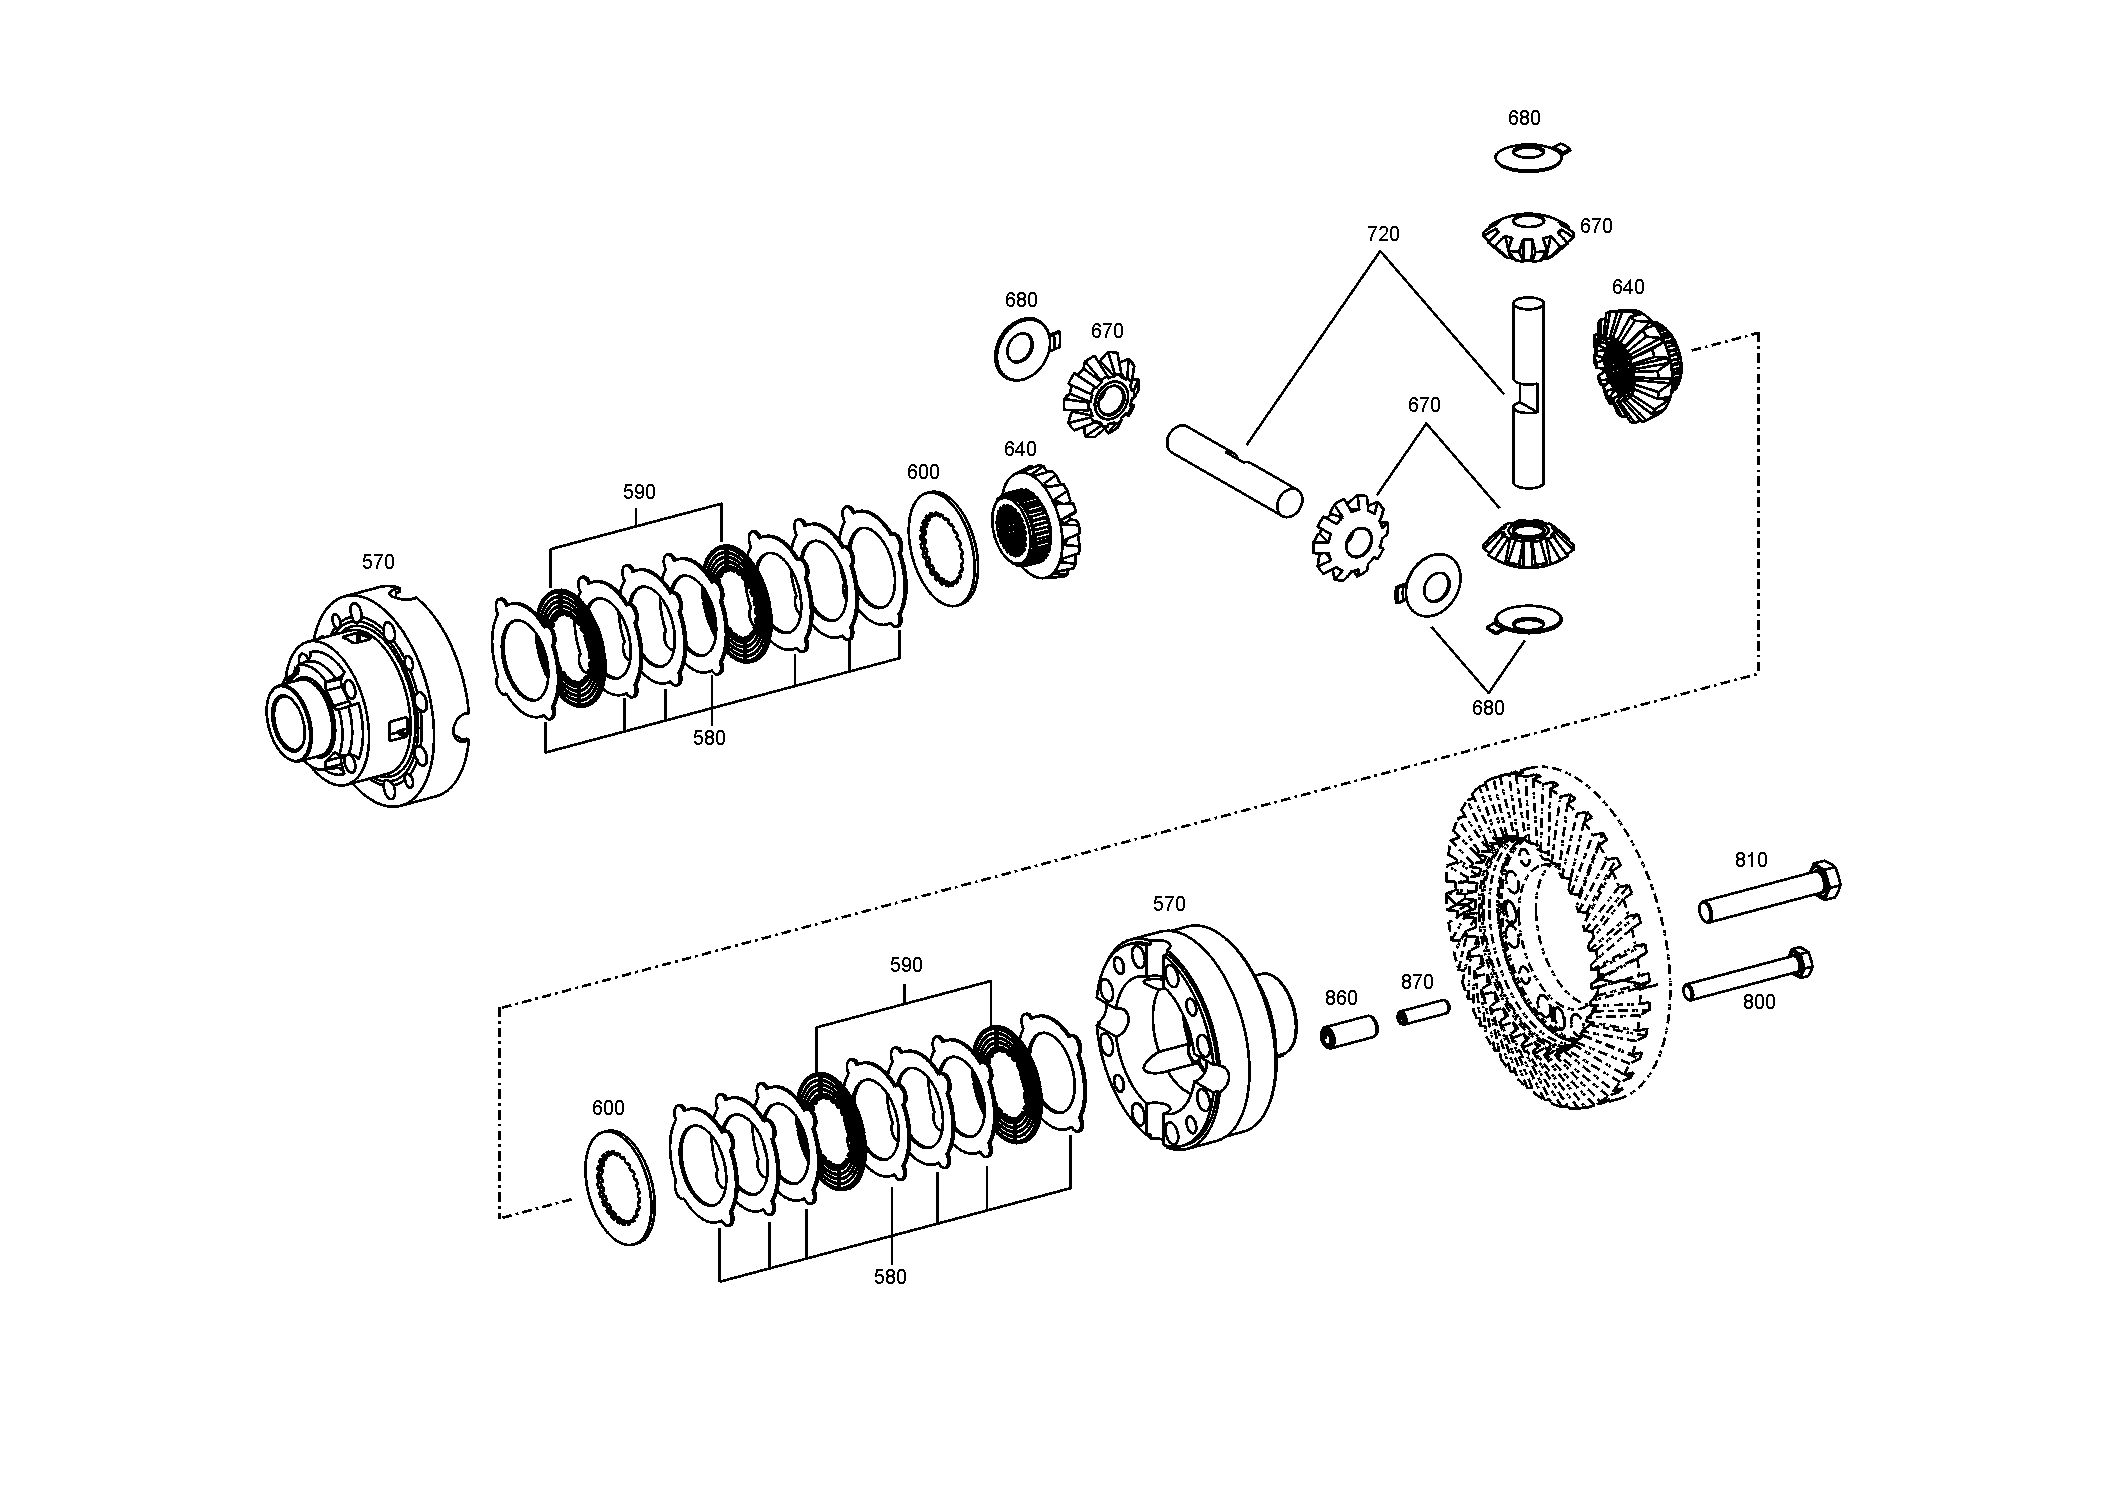 drawing for AGCO 020728R1 - PRESSURE DISK (figure 1)